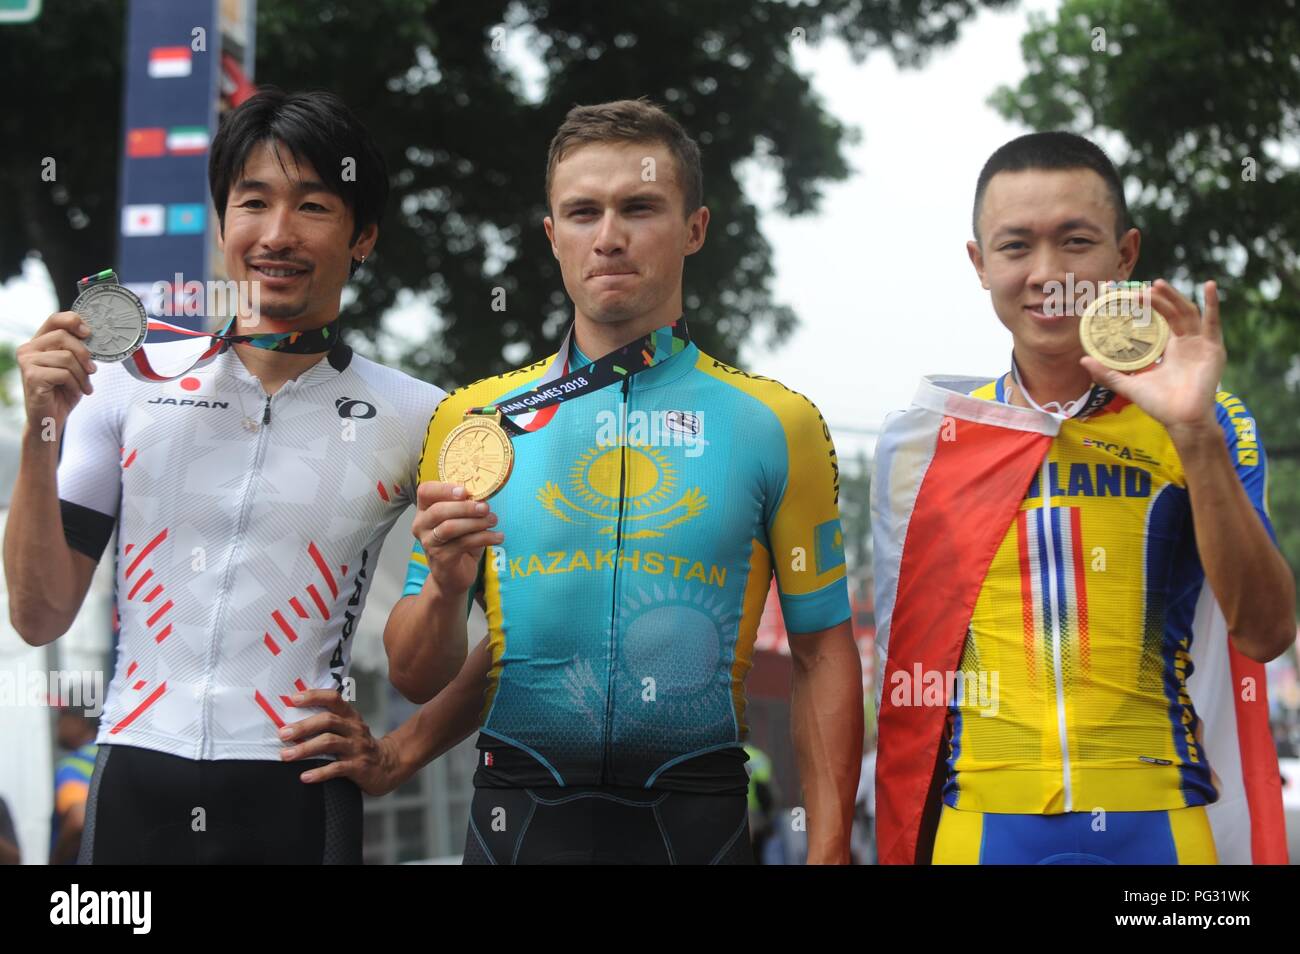 Subang, West Java. 23rd Aug, 2018. Silver medalist Beppu Fumiyuki of Japan, gold medalist Alexey Lutsenko of Kazakhstan and bronze medalist Navuti Liphongyu of Thailand (L-R) pose for photos after awarding ceremony of the men's 150 km individual road race of cycling road event at the 18th Asian Games 2018 in Subang, West Java, Indonesia. Aug. 23, 2018. Credit: Agung Kuncahya B./Xinhua/Alamy Live News Stock Photo